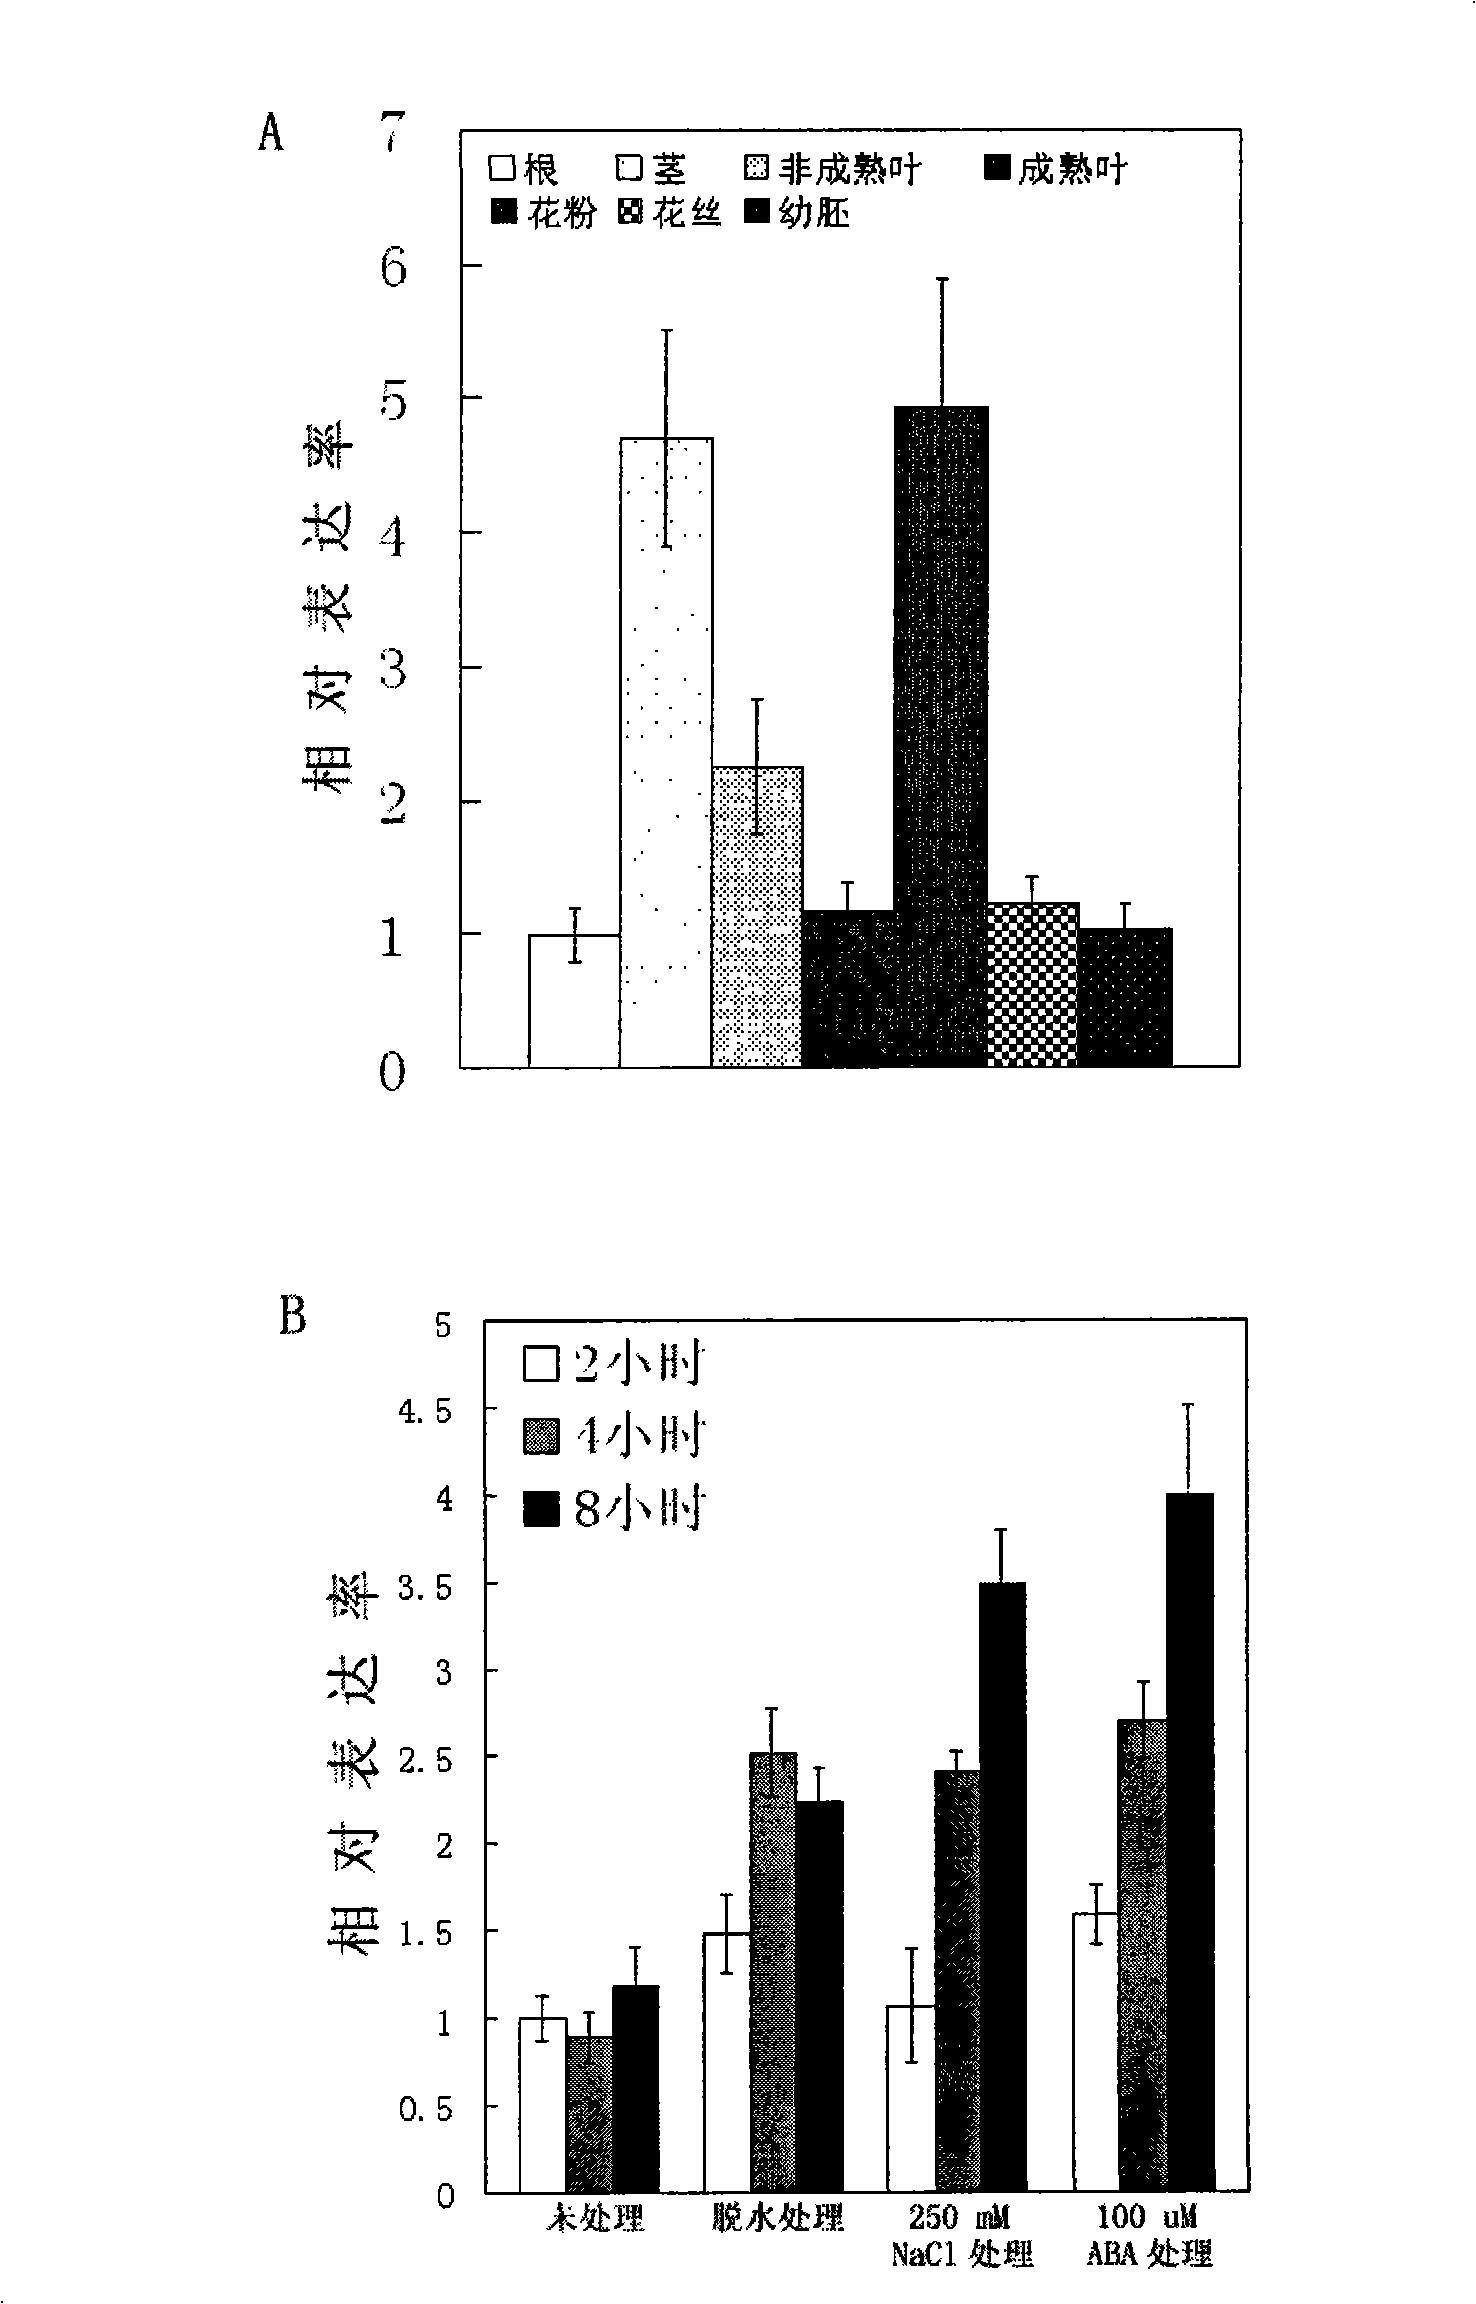 Gene for enhancing draught-resistance of plant